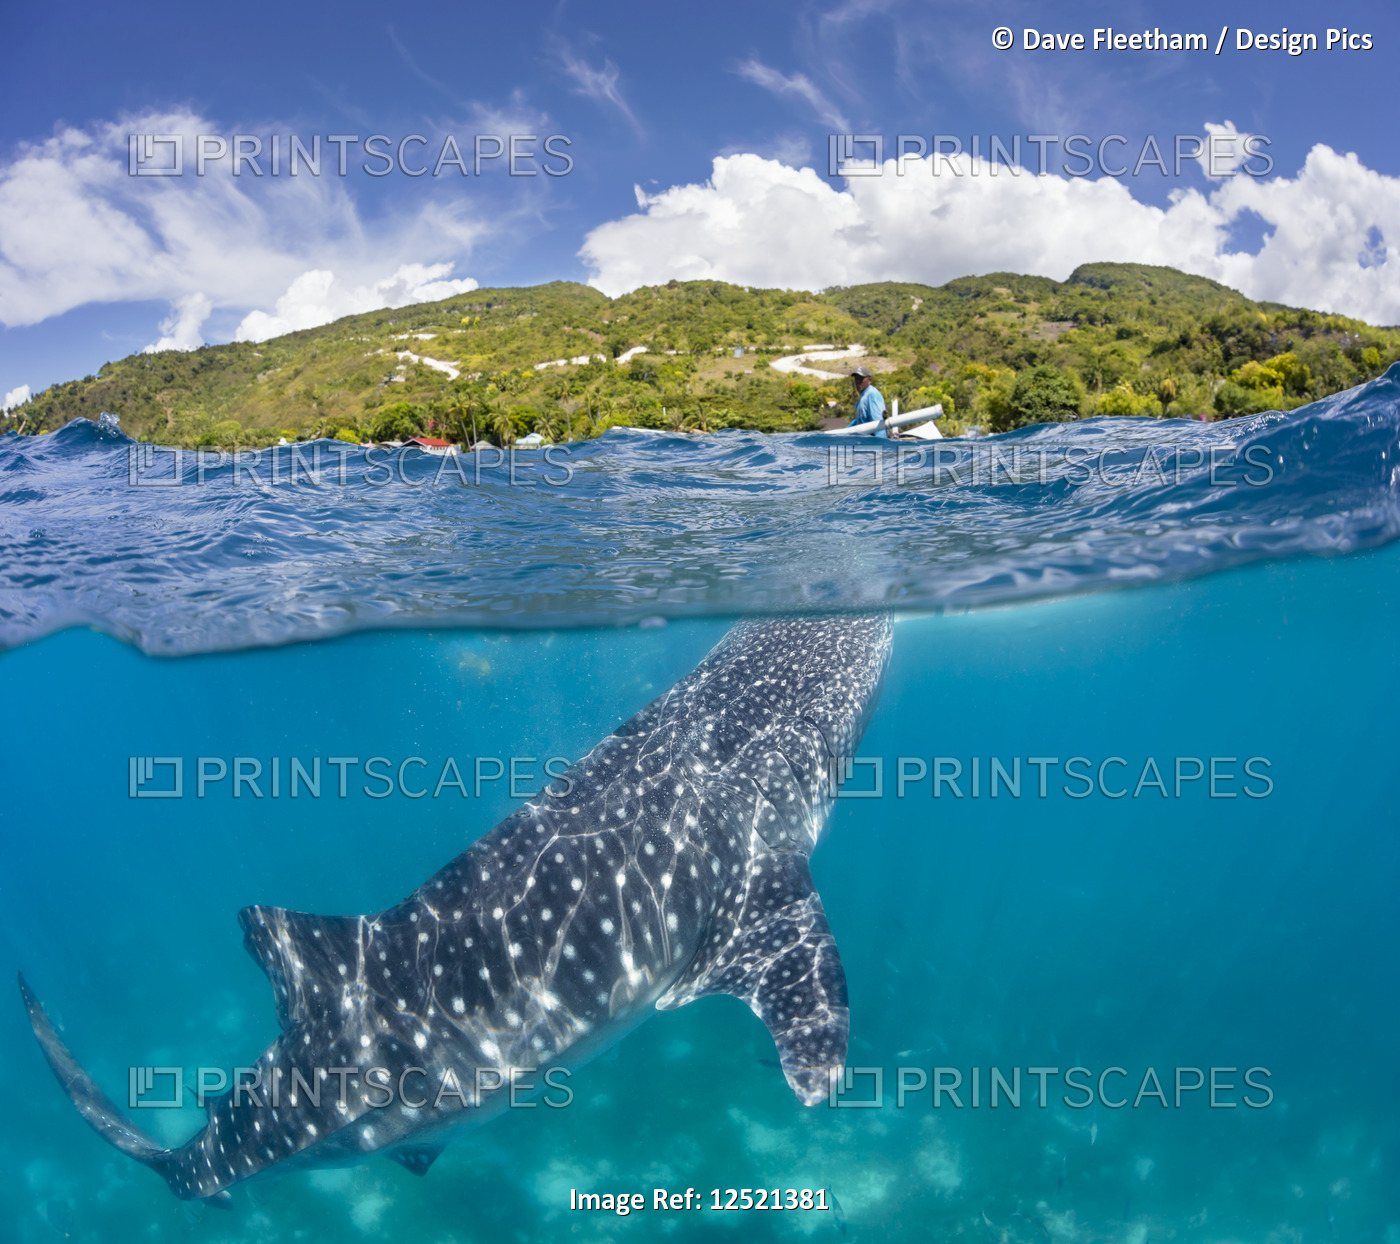 A commercial whale shark encounter with a feeder above on a canoe and a Whale ...